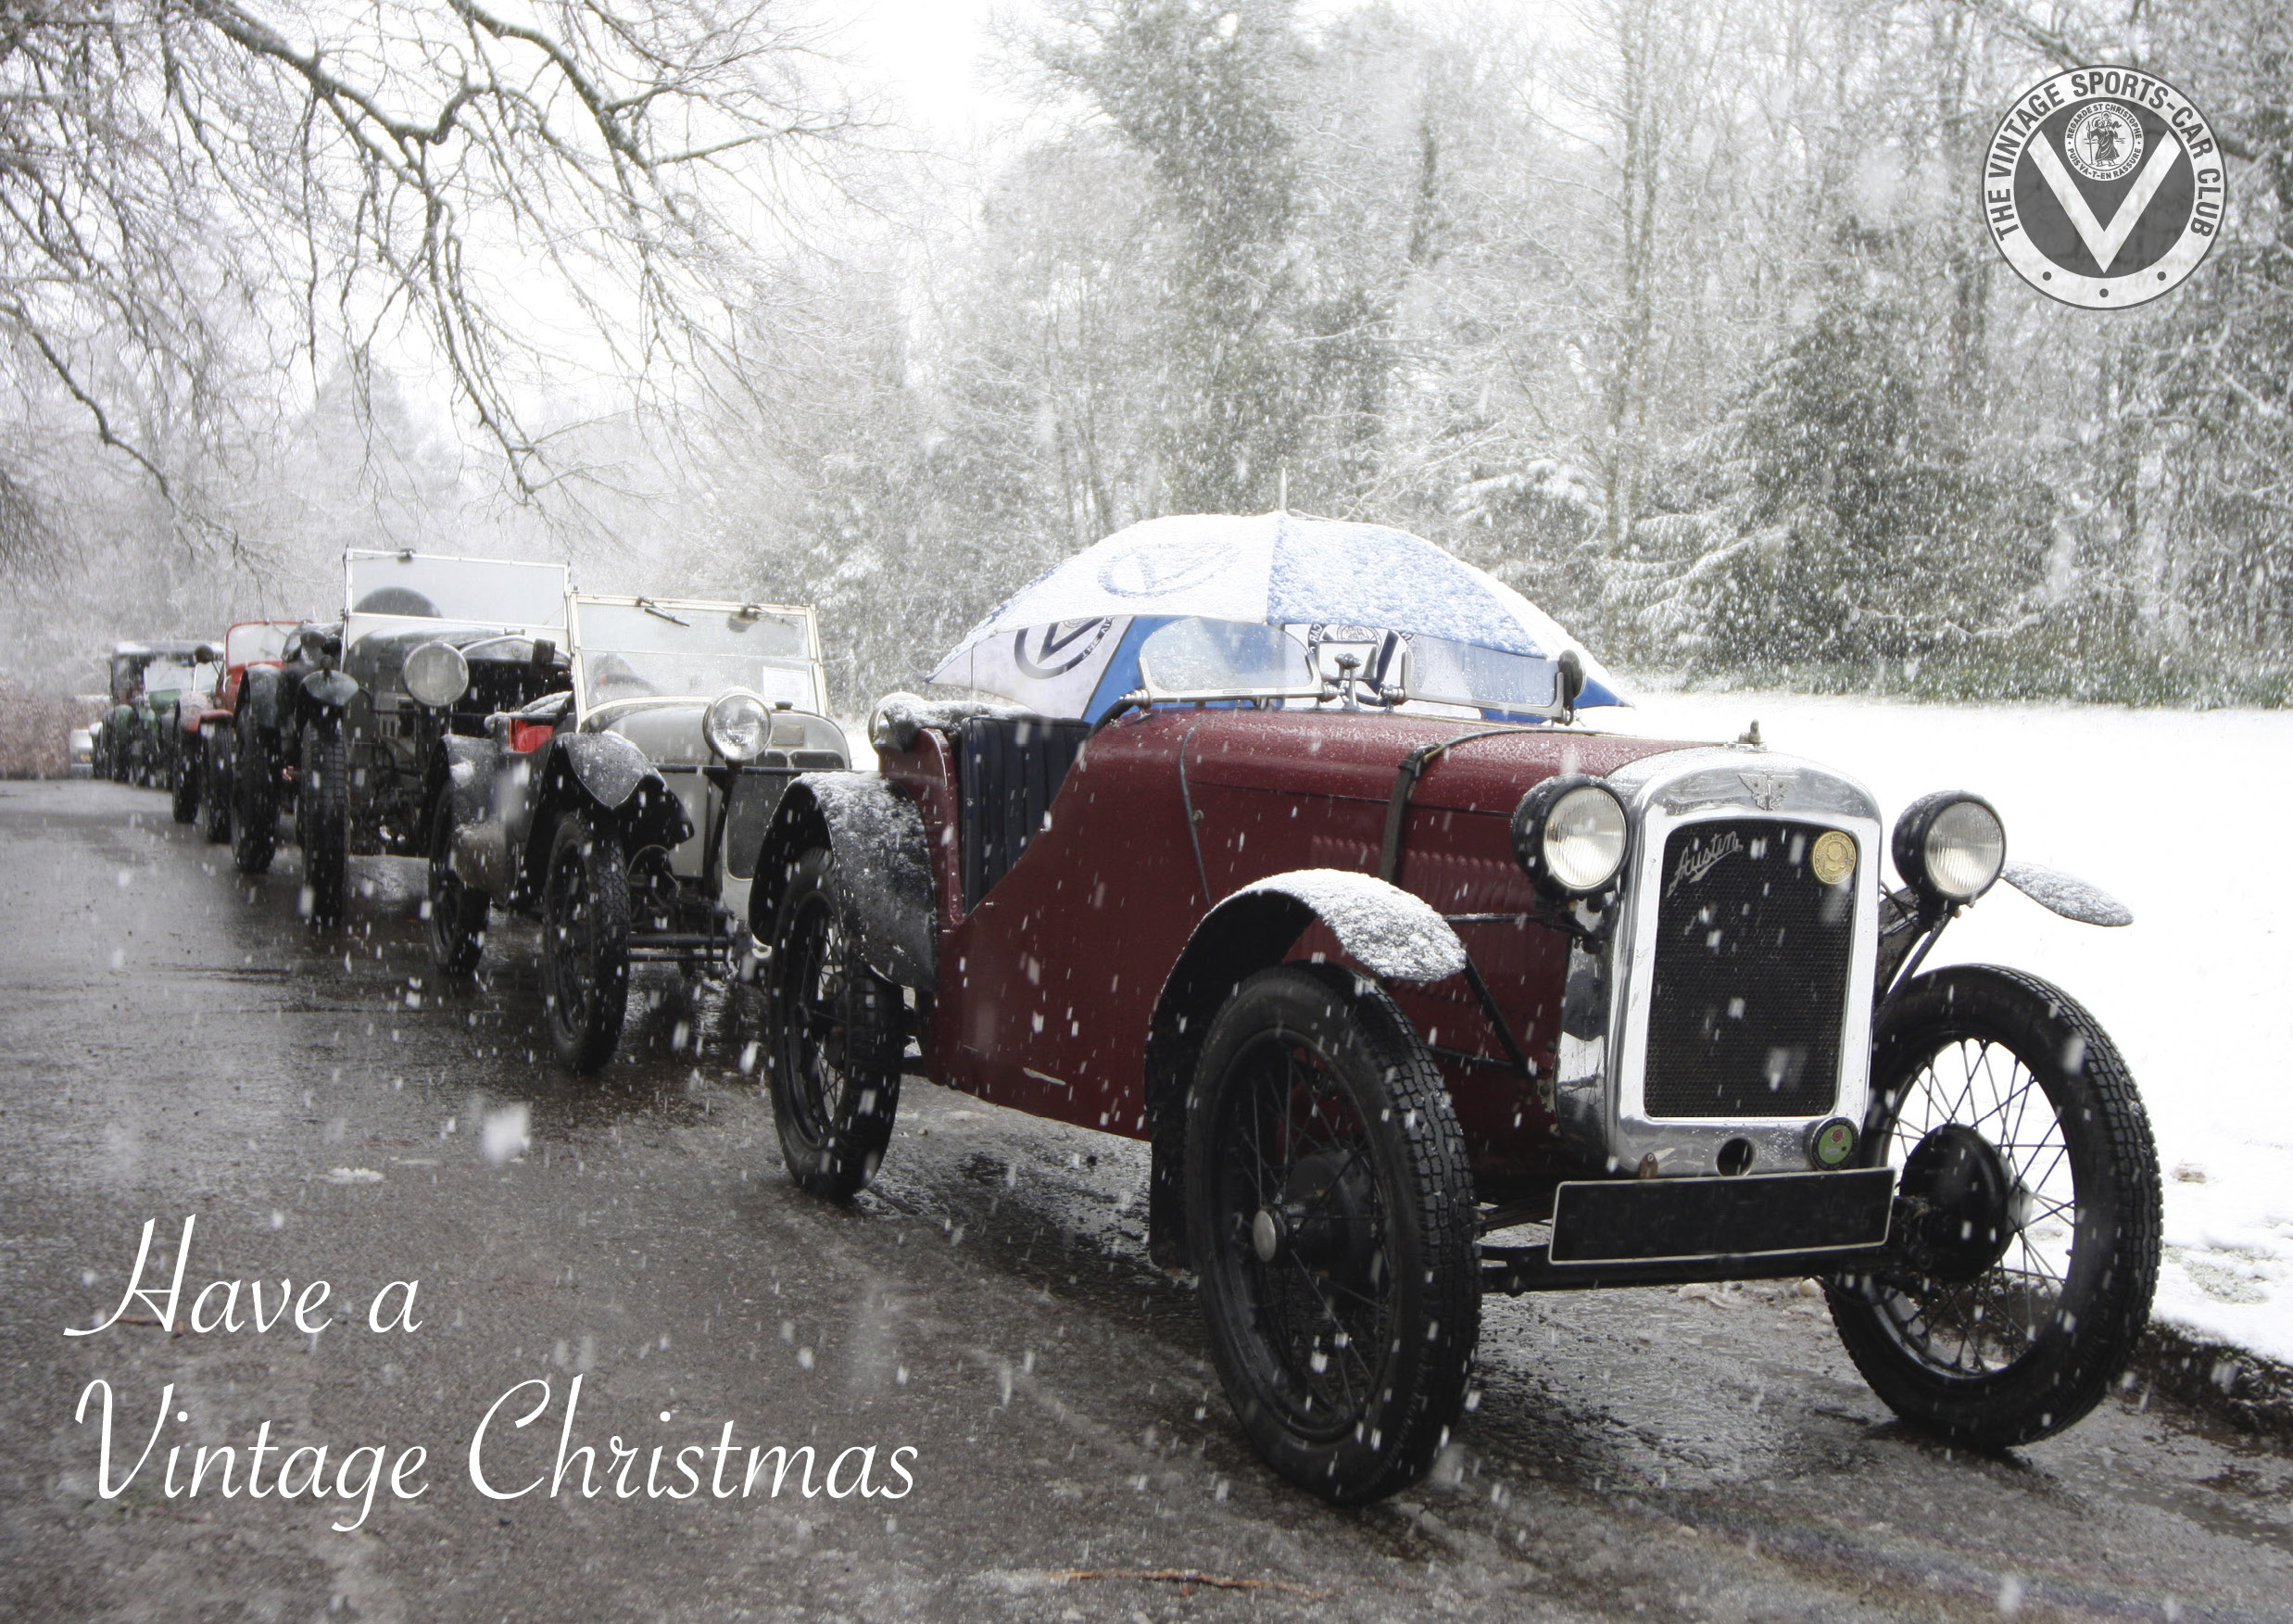 VSCC CHRISTMAS CARD 2016 (AND A SPECIAL VSCC BOOK OFFER!) - LAST CHANCE! cover